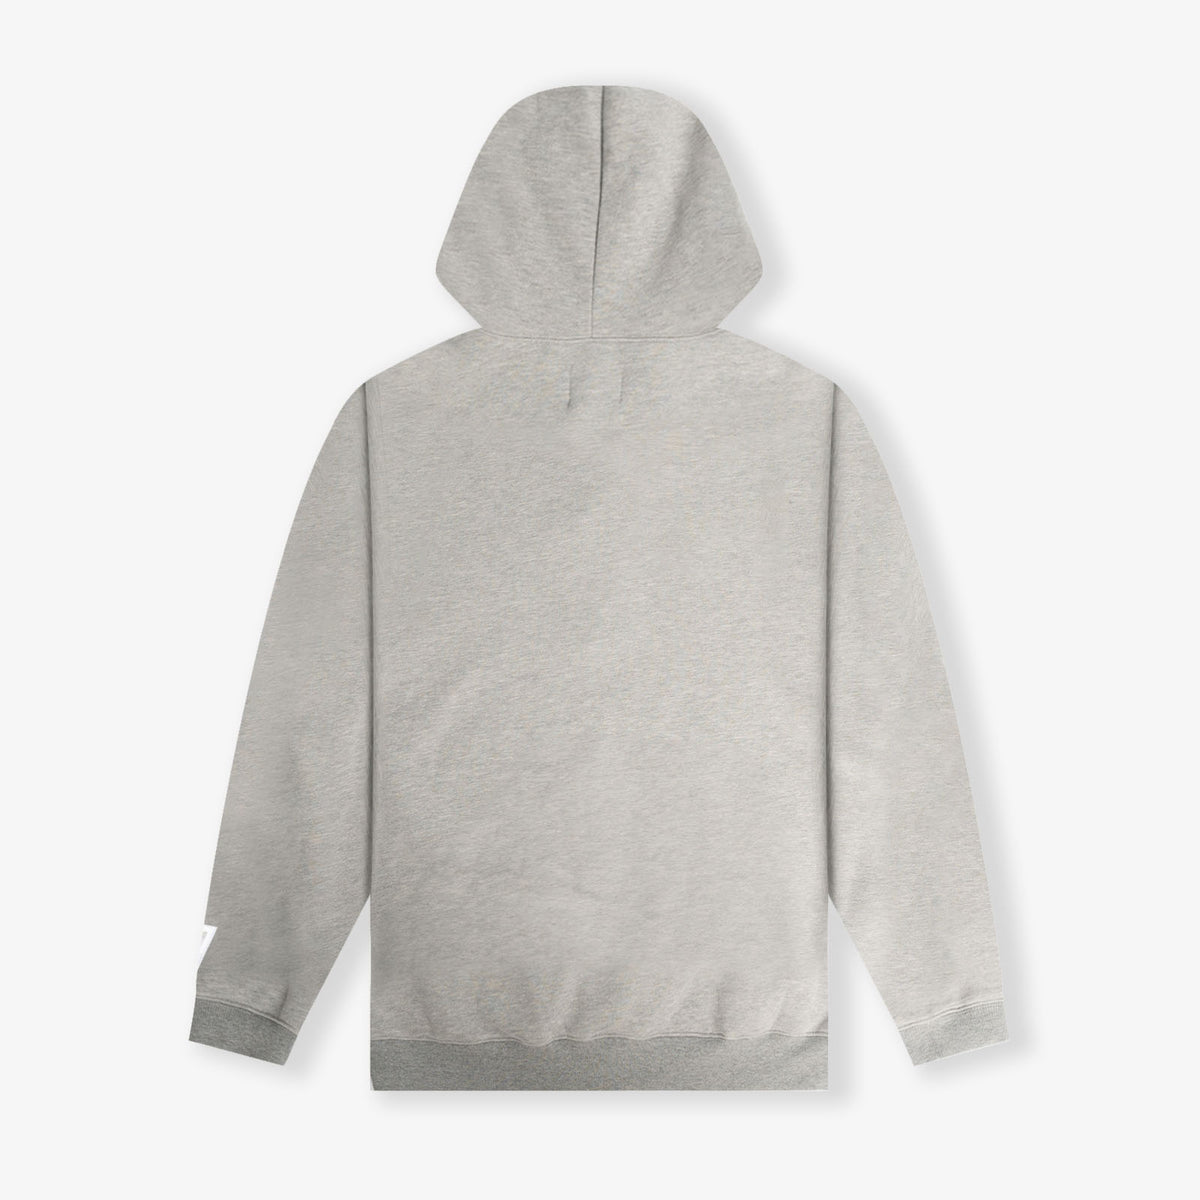 The NYC Patch Hoodie - Light Grey